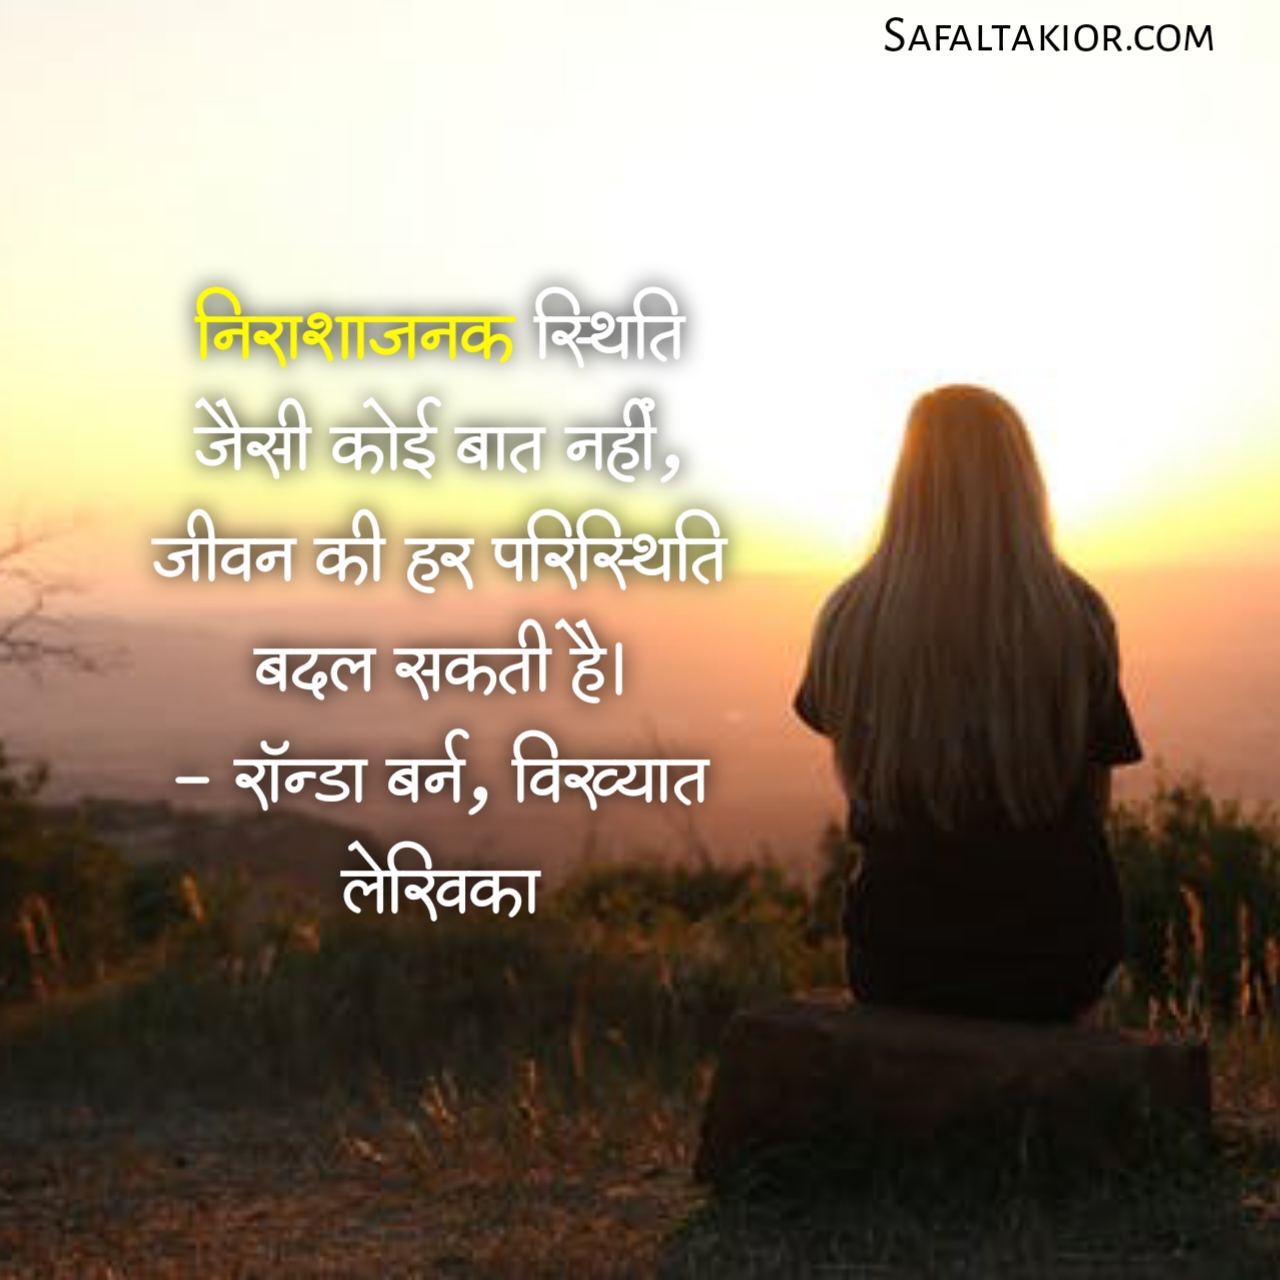 Meaningful Life Quotes in Hindi